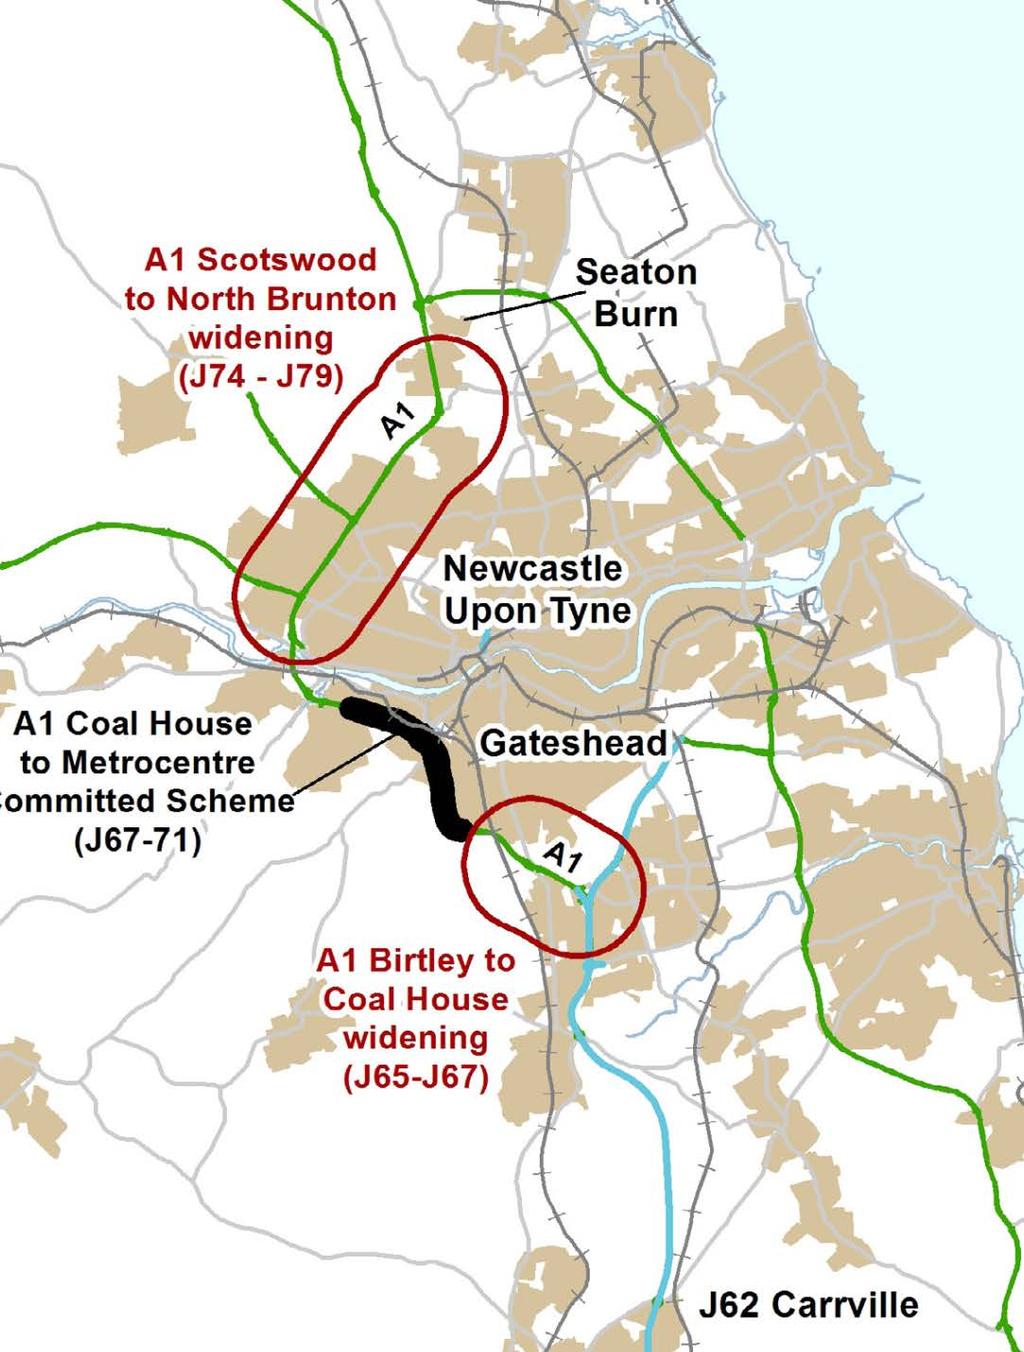 Investment package worth around 350 million A1 Birtley to Coal House (J65-J67) Online widening south of Gateshead to 3 lanes.